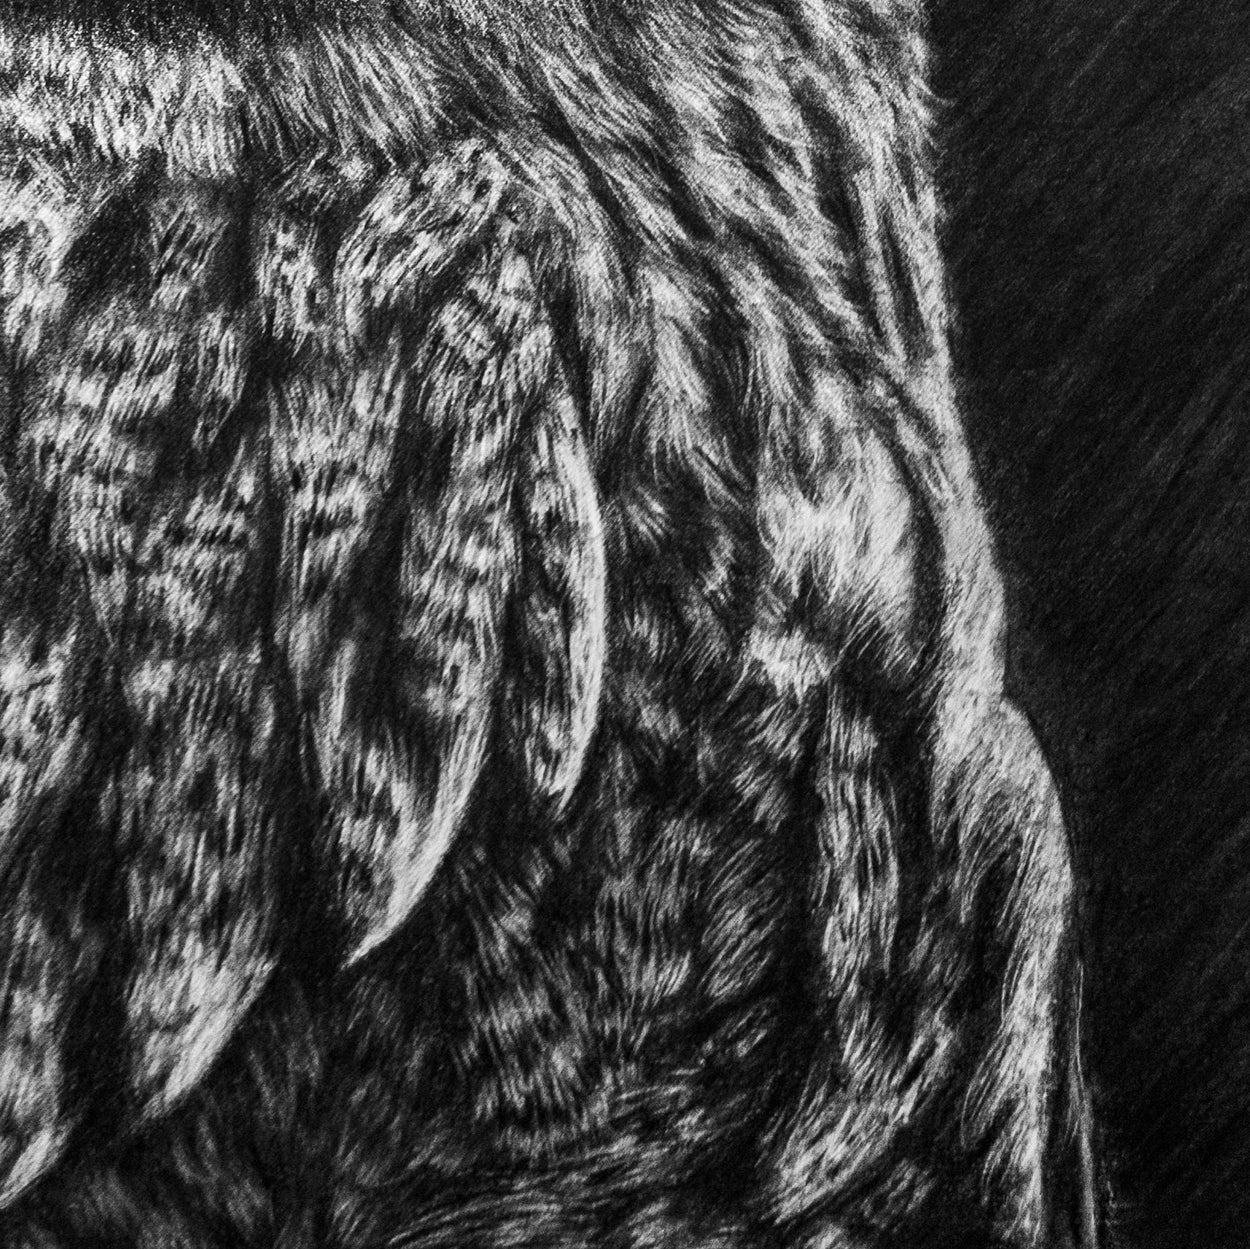 Close-up of a charcoal drawing of great grey owl feathers